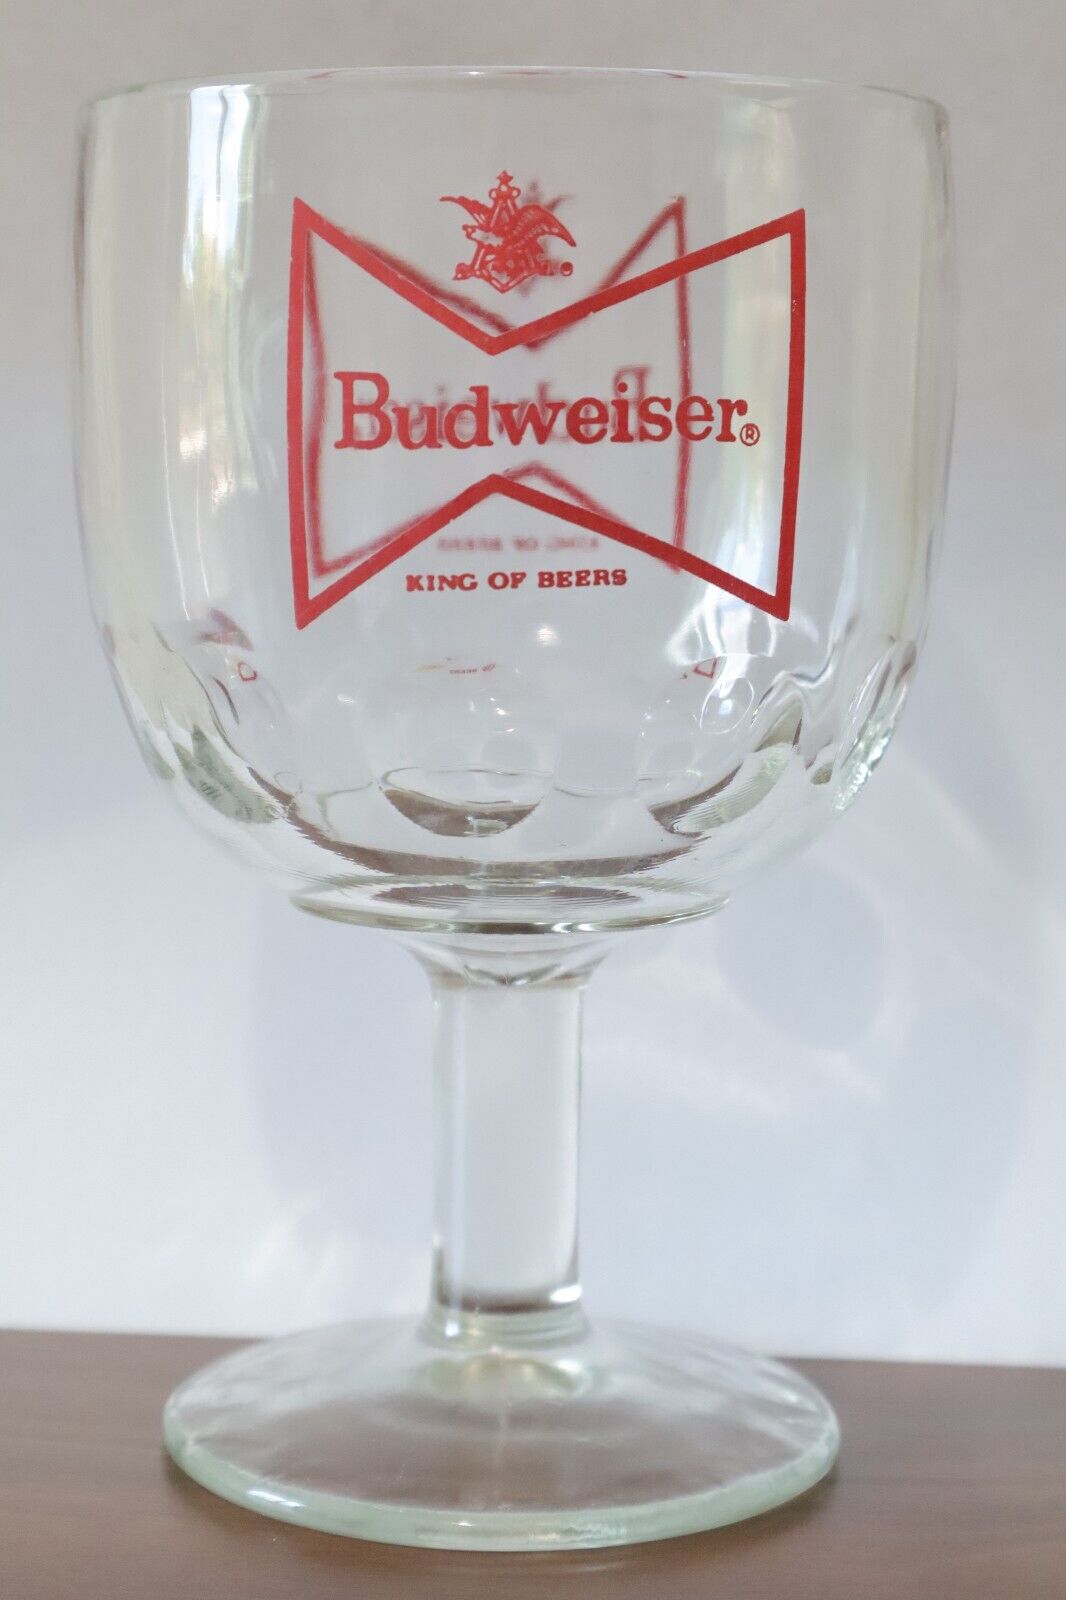 ☑️ Budweiser King of Beers Goblet Glass with Thumbprint, King's Chalice Cup